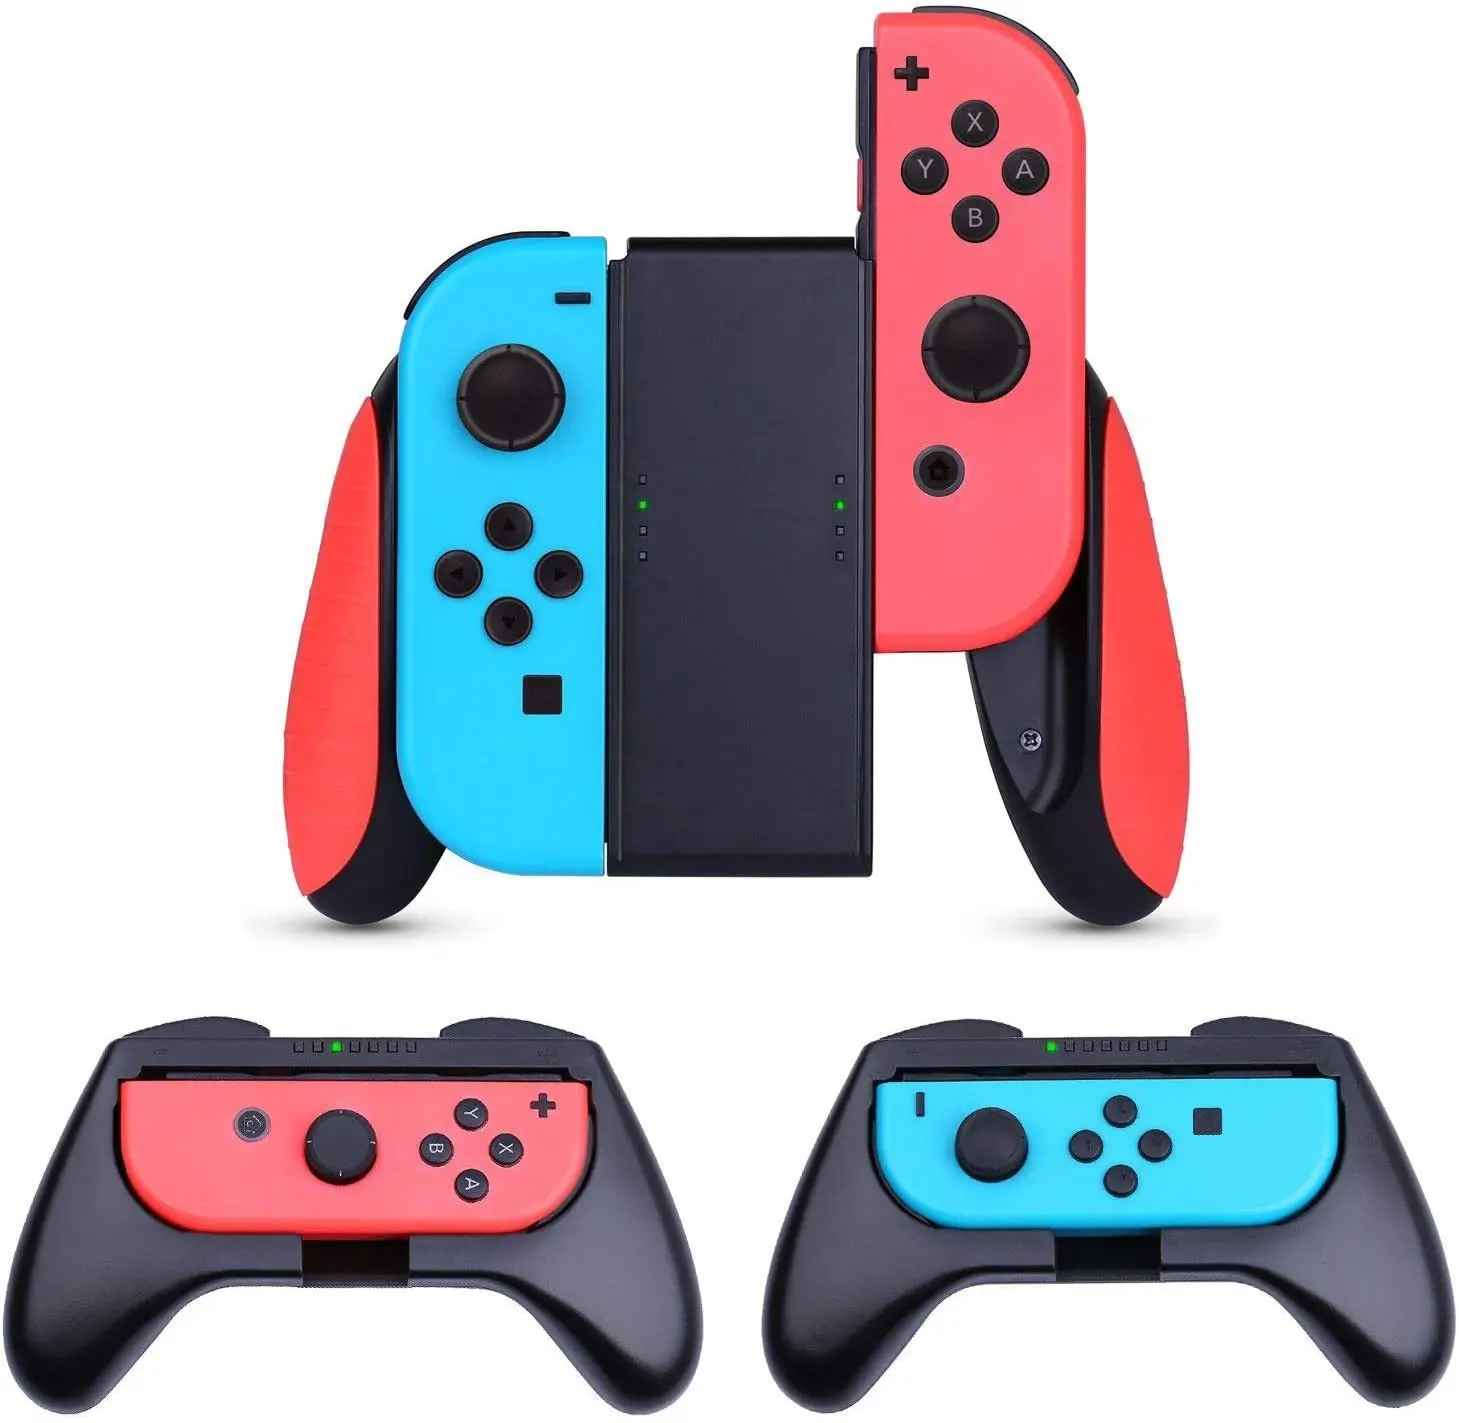 Hand Grip For Nintendo Switch Joy Con Grip 3 Pack Wear Resistant Game Controller Handle Case Kit For Nintendo Switch Joy Con Red